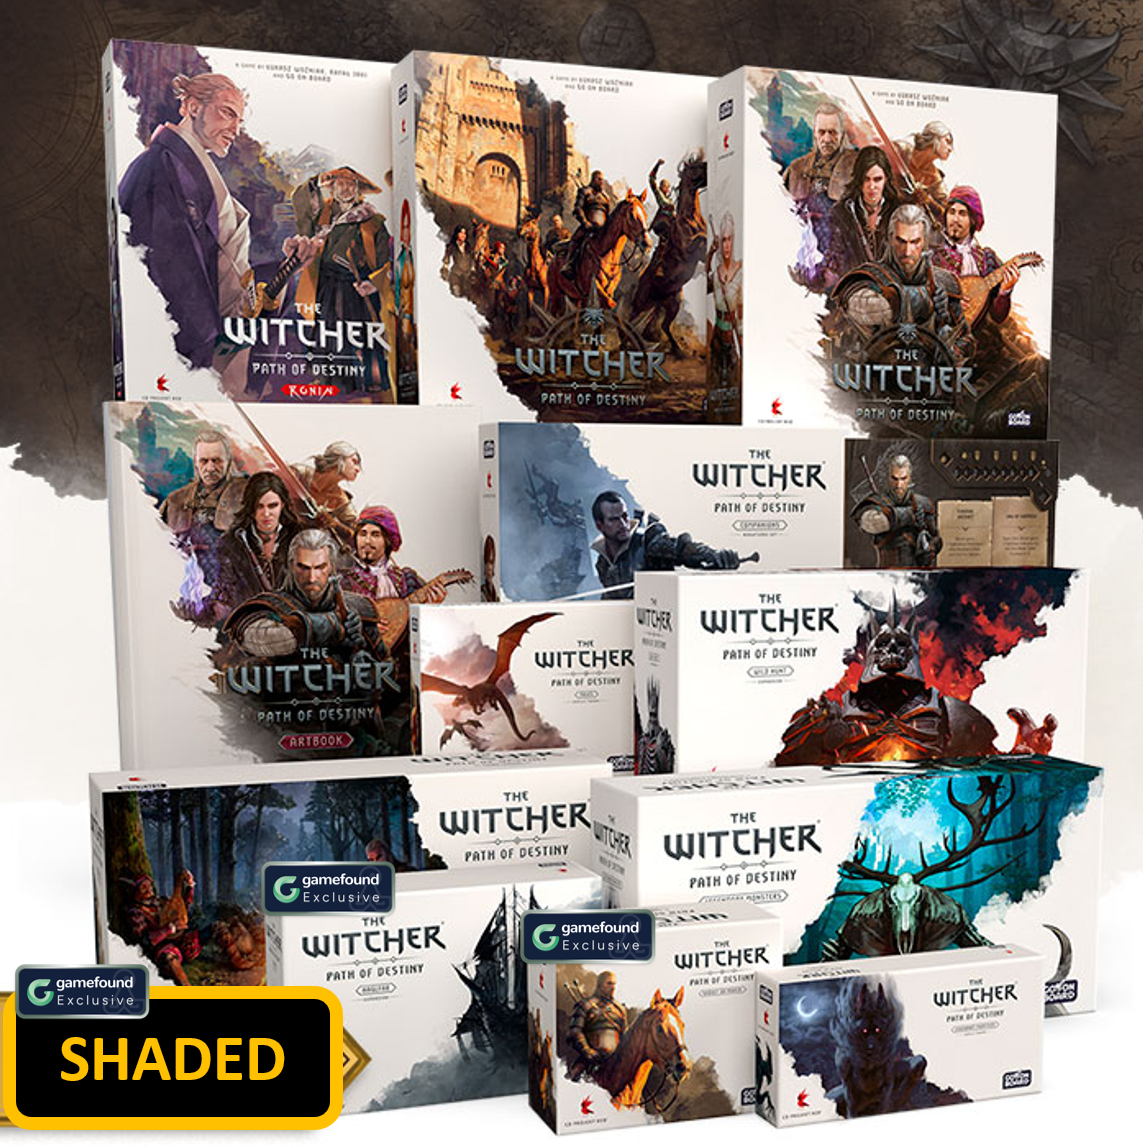 Gamefound Exclusive The Witcher: Path of Destiny Board Game I Want It All Pledge, Shaded Edition